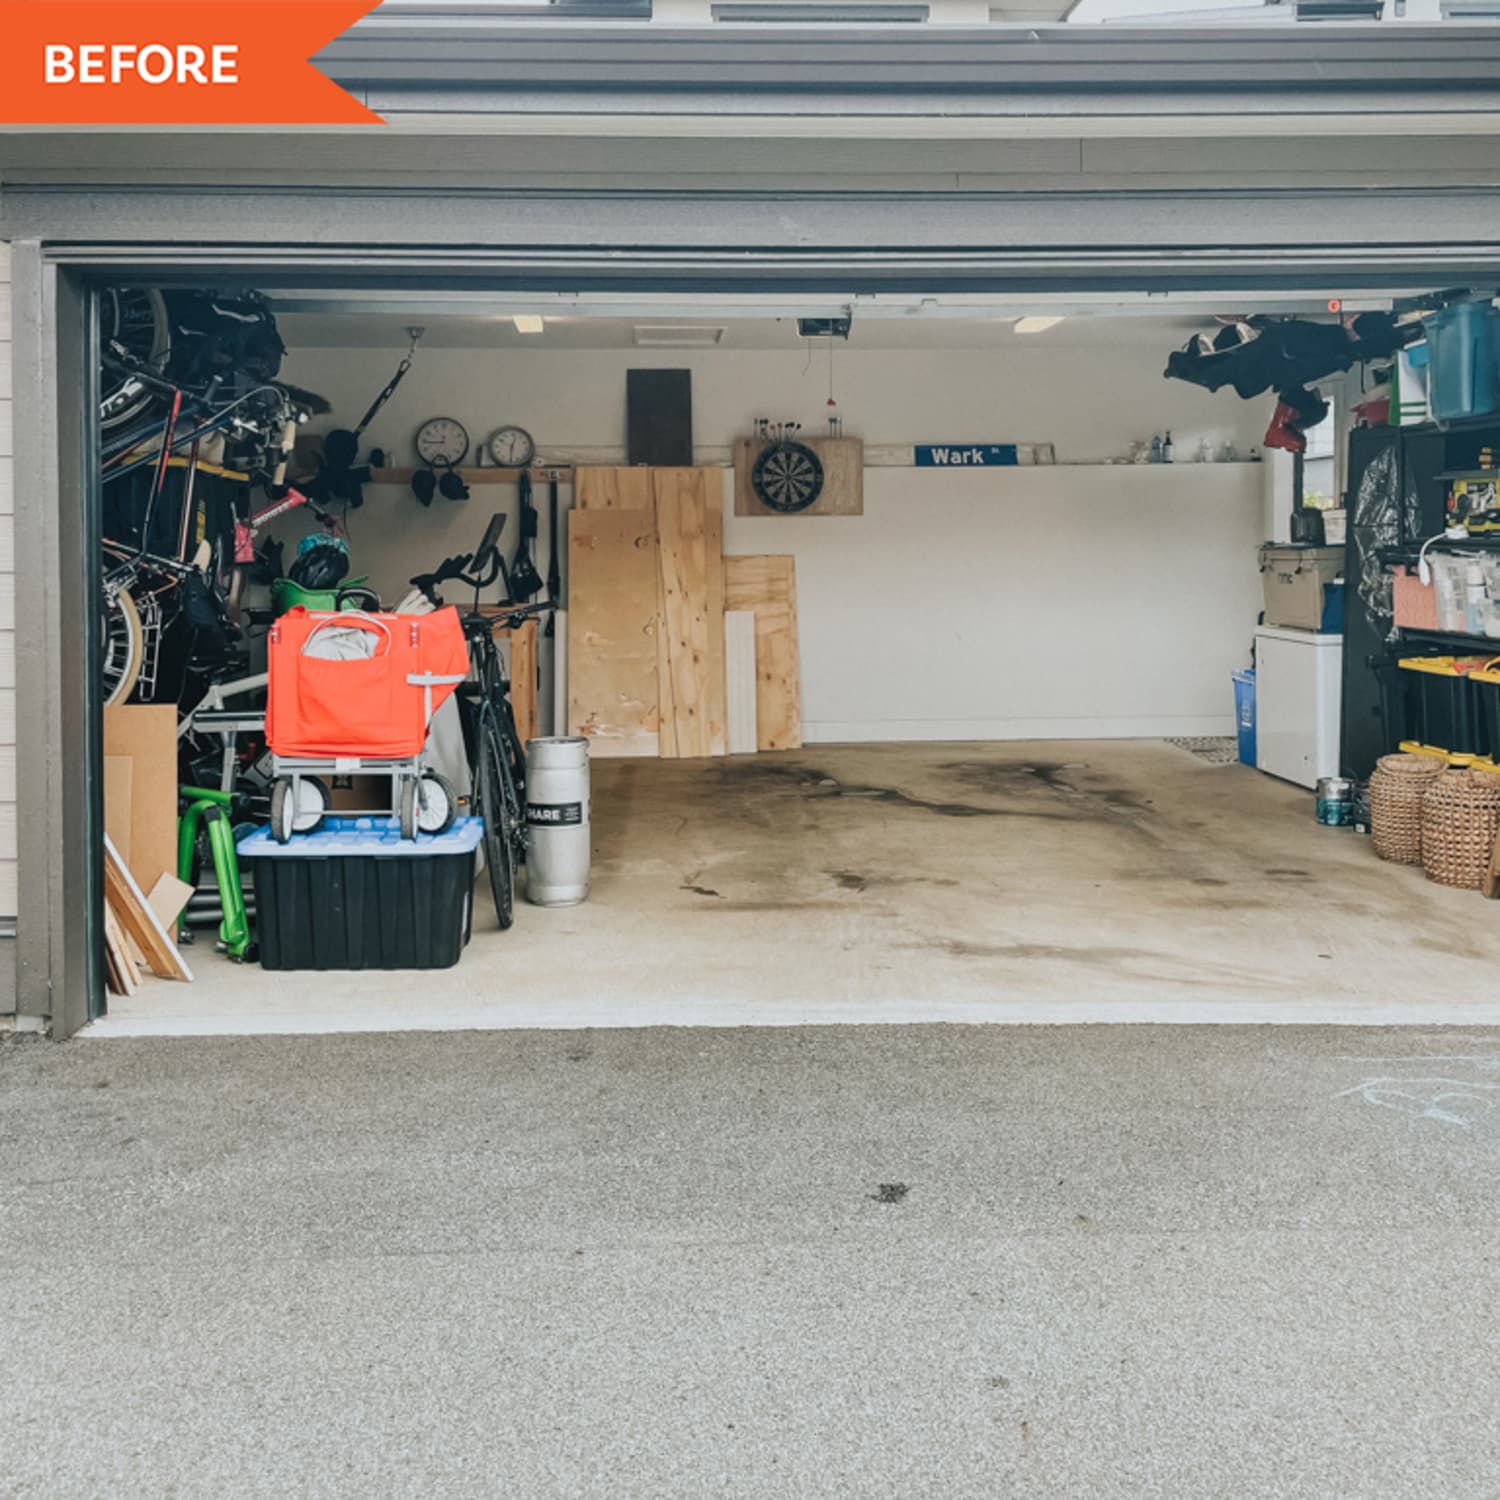 https://cdn.apartmenttherapy.info/image/upload/f_jpg,q_auto:eco,c_fill,g_auto,w_1500,ar_1:1/at%2Forganize-clean%2Fbefore-after%2FSamantha%20Potter%20Garage%2FSamanthaPotter_Before1